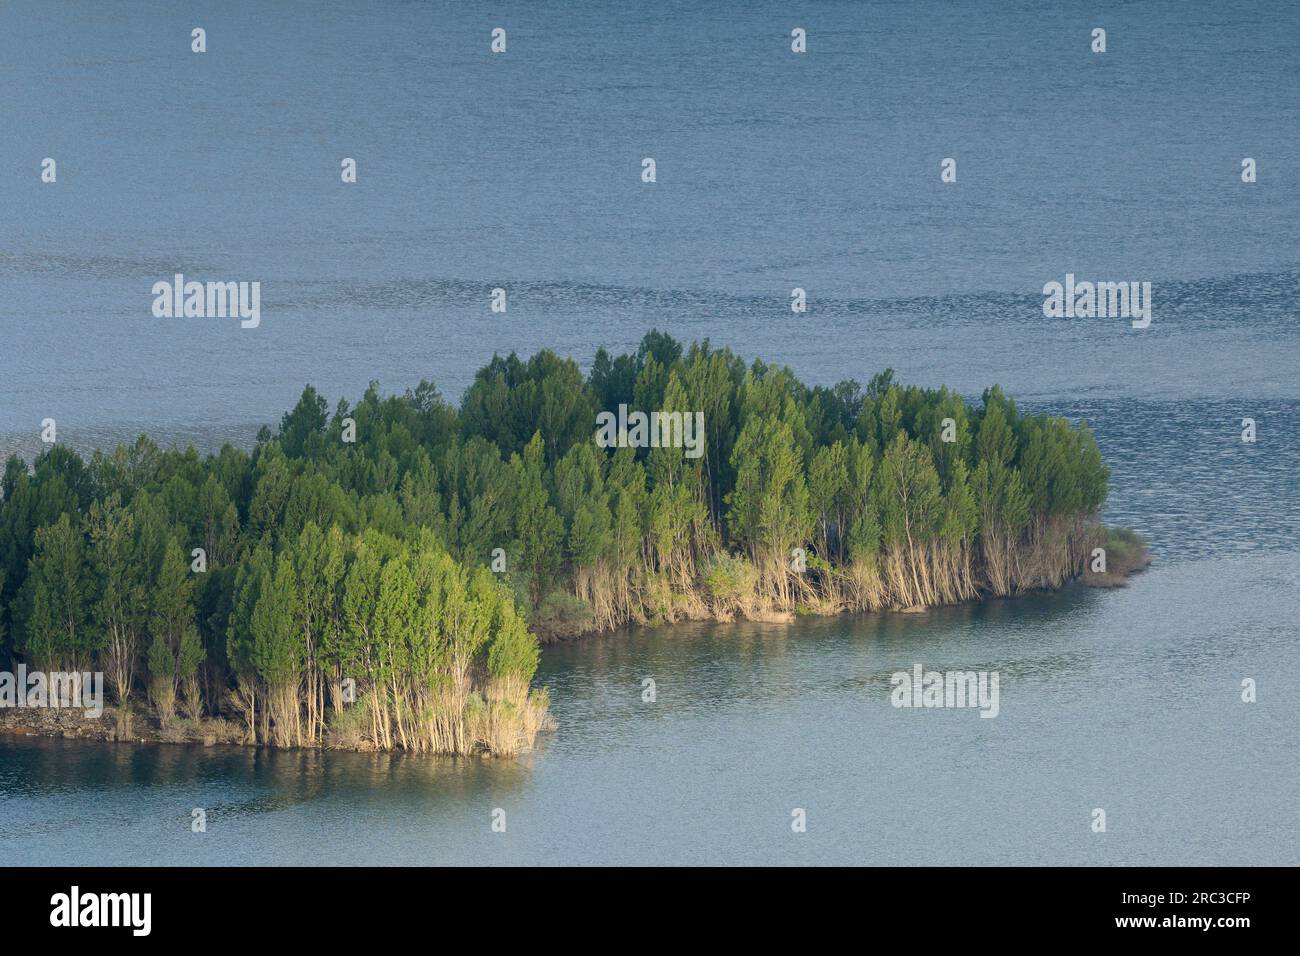 Island in the middle of the Riaño reservoir Stock Photo